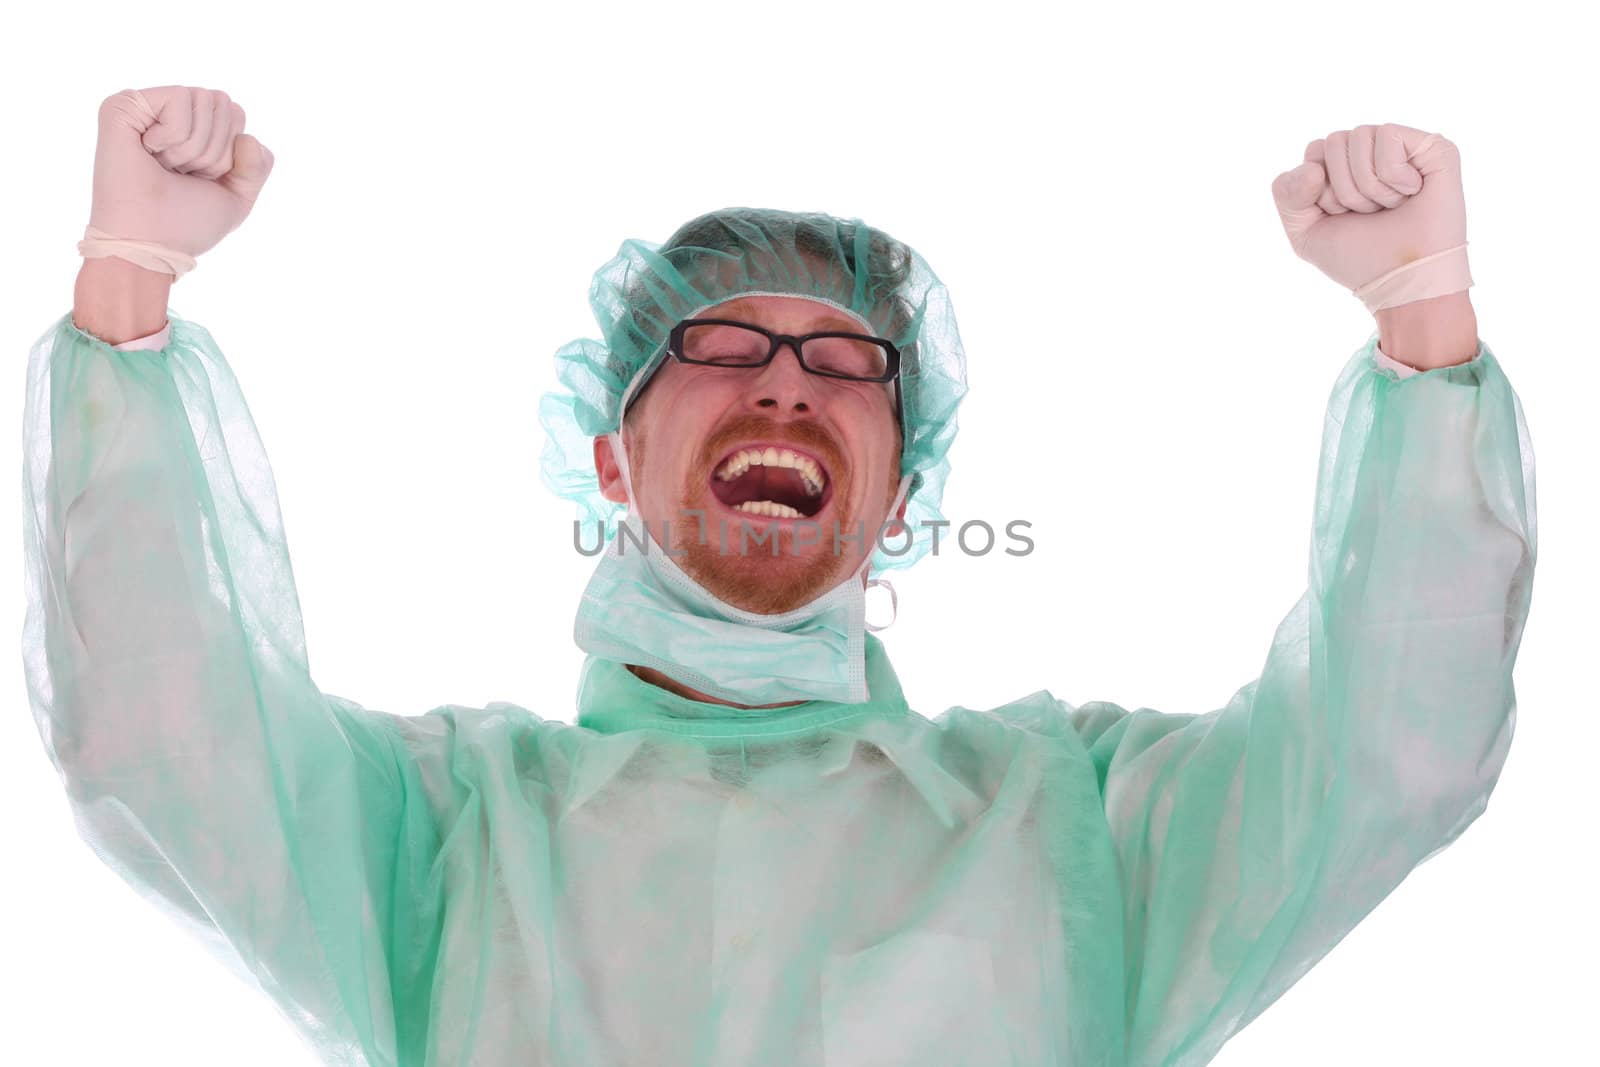 Details an surgeon happy on white background